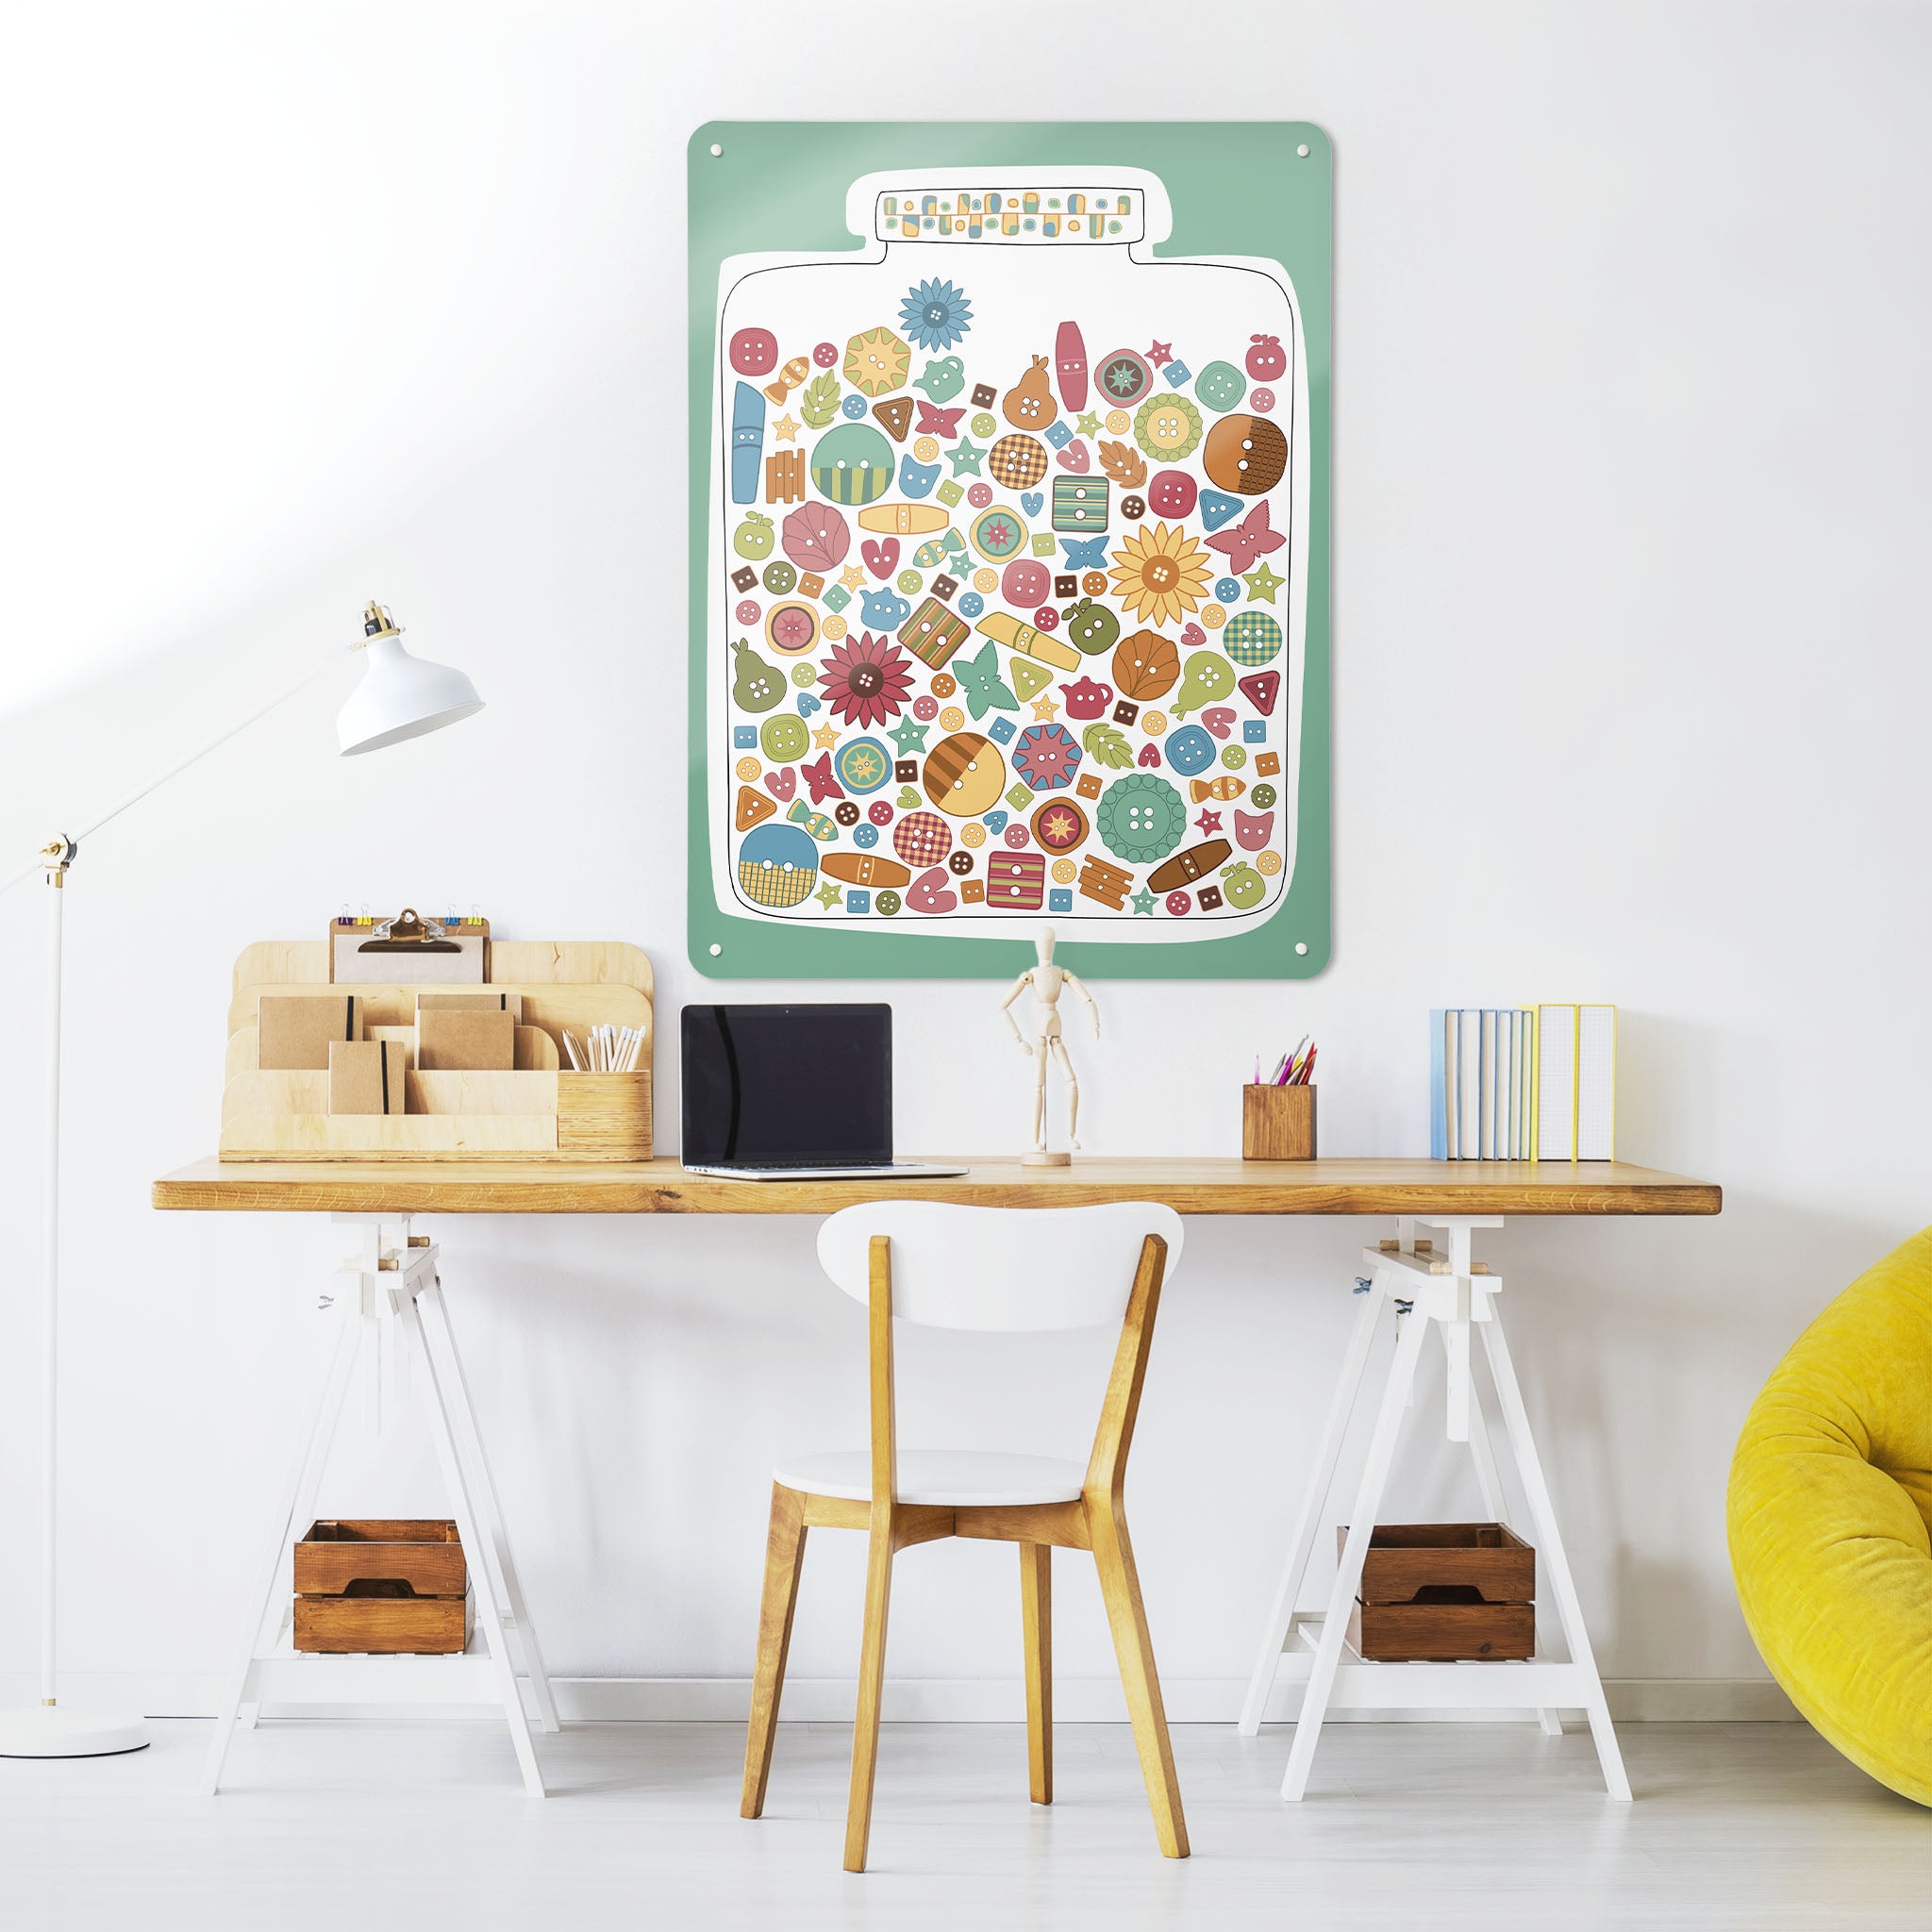 A desk in a workspace setting in a white interior with a magnetic metal wall art panel showing a jar full of multi coloured buttons design